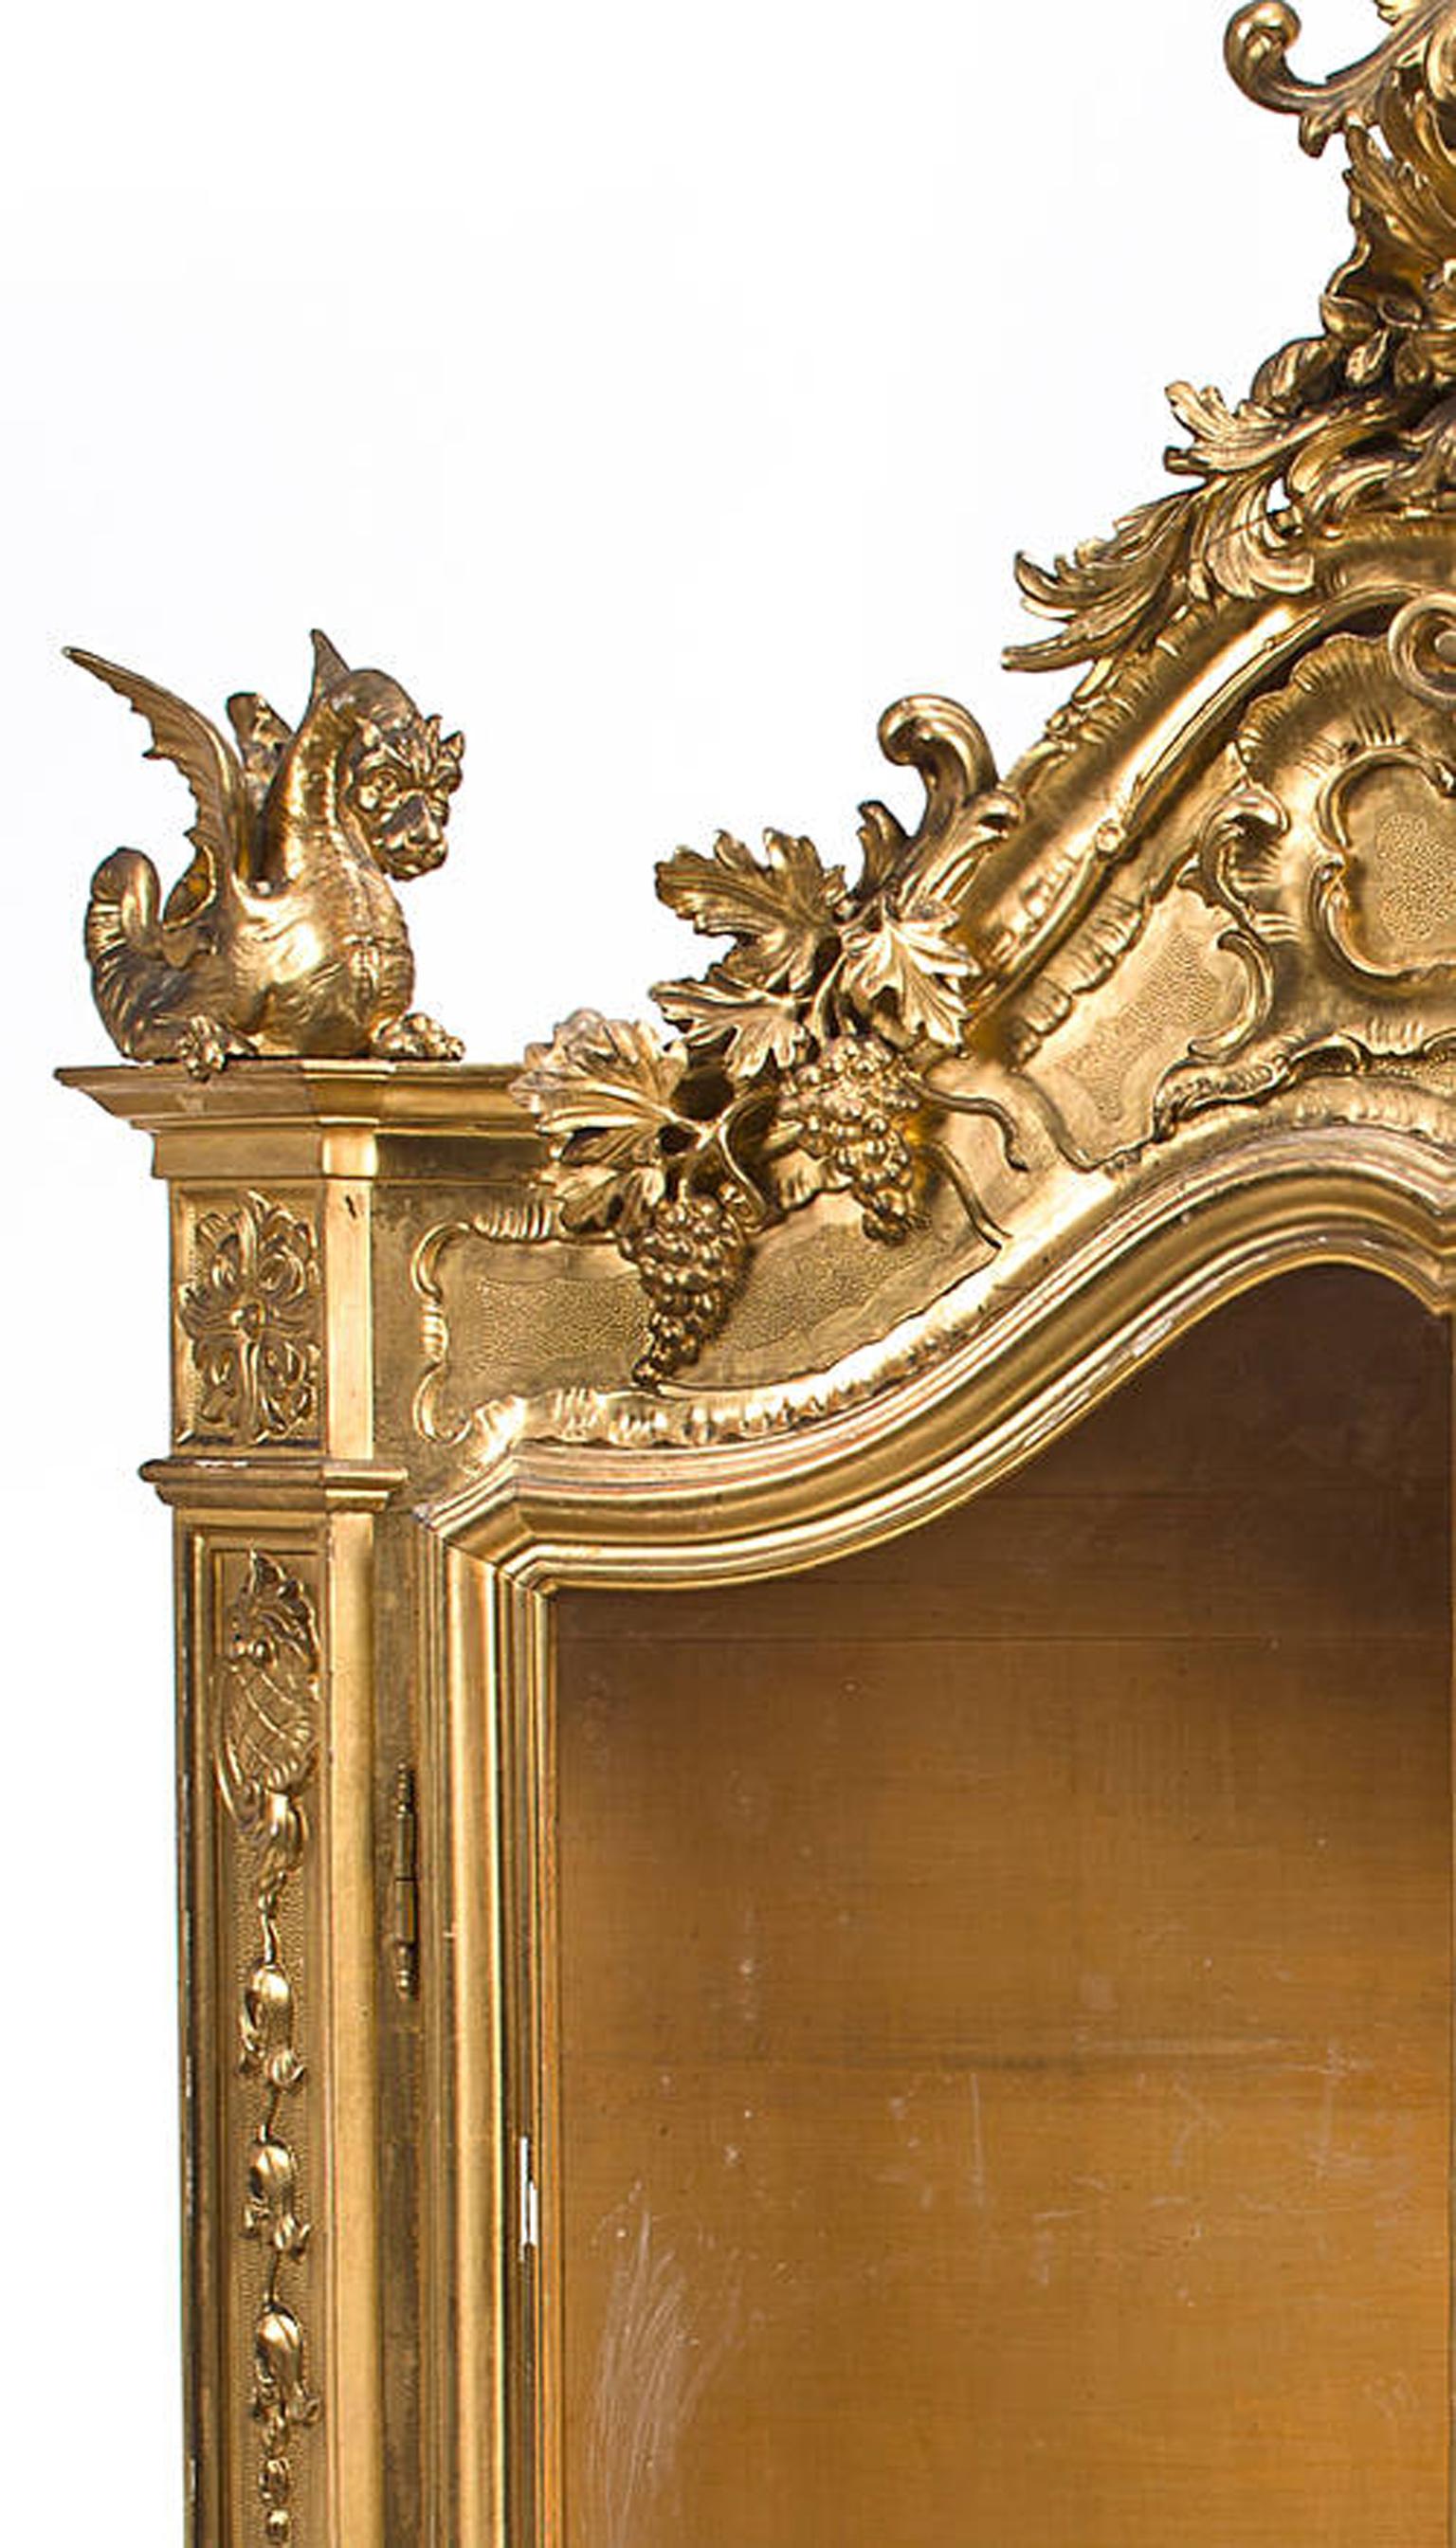 Impressive Venetian Rococo style giltwood vitrine cabinet, 19th century.
The finely carved giltwood vitrine is surmounted by a scrolling acanthus and floral bouquet, above a Rocaille shell motif pediment with grapes and winged dragons, over two